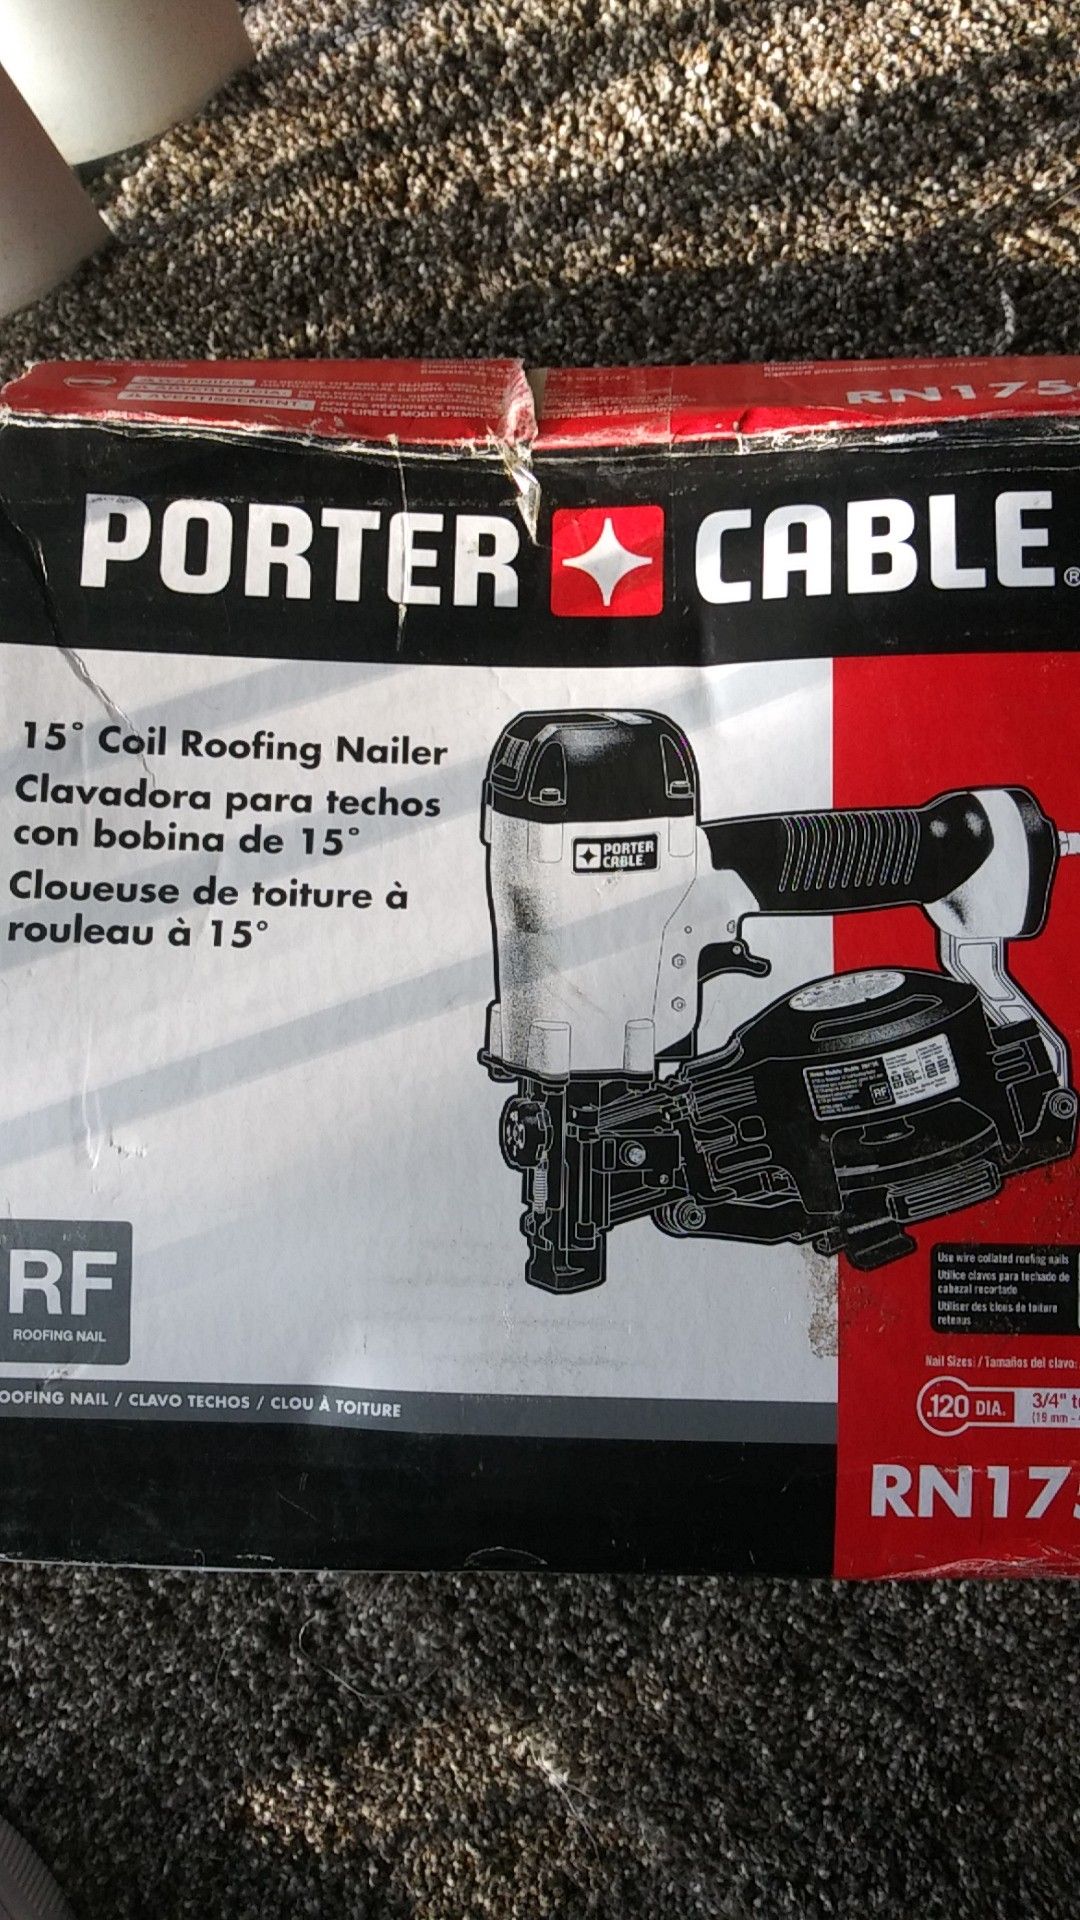 Porter Cable coil roofing nail gun